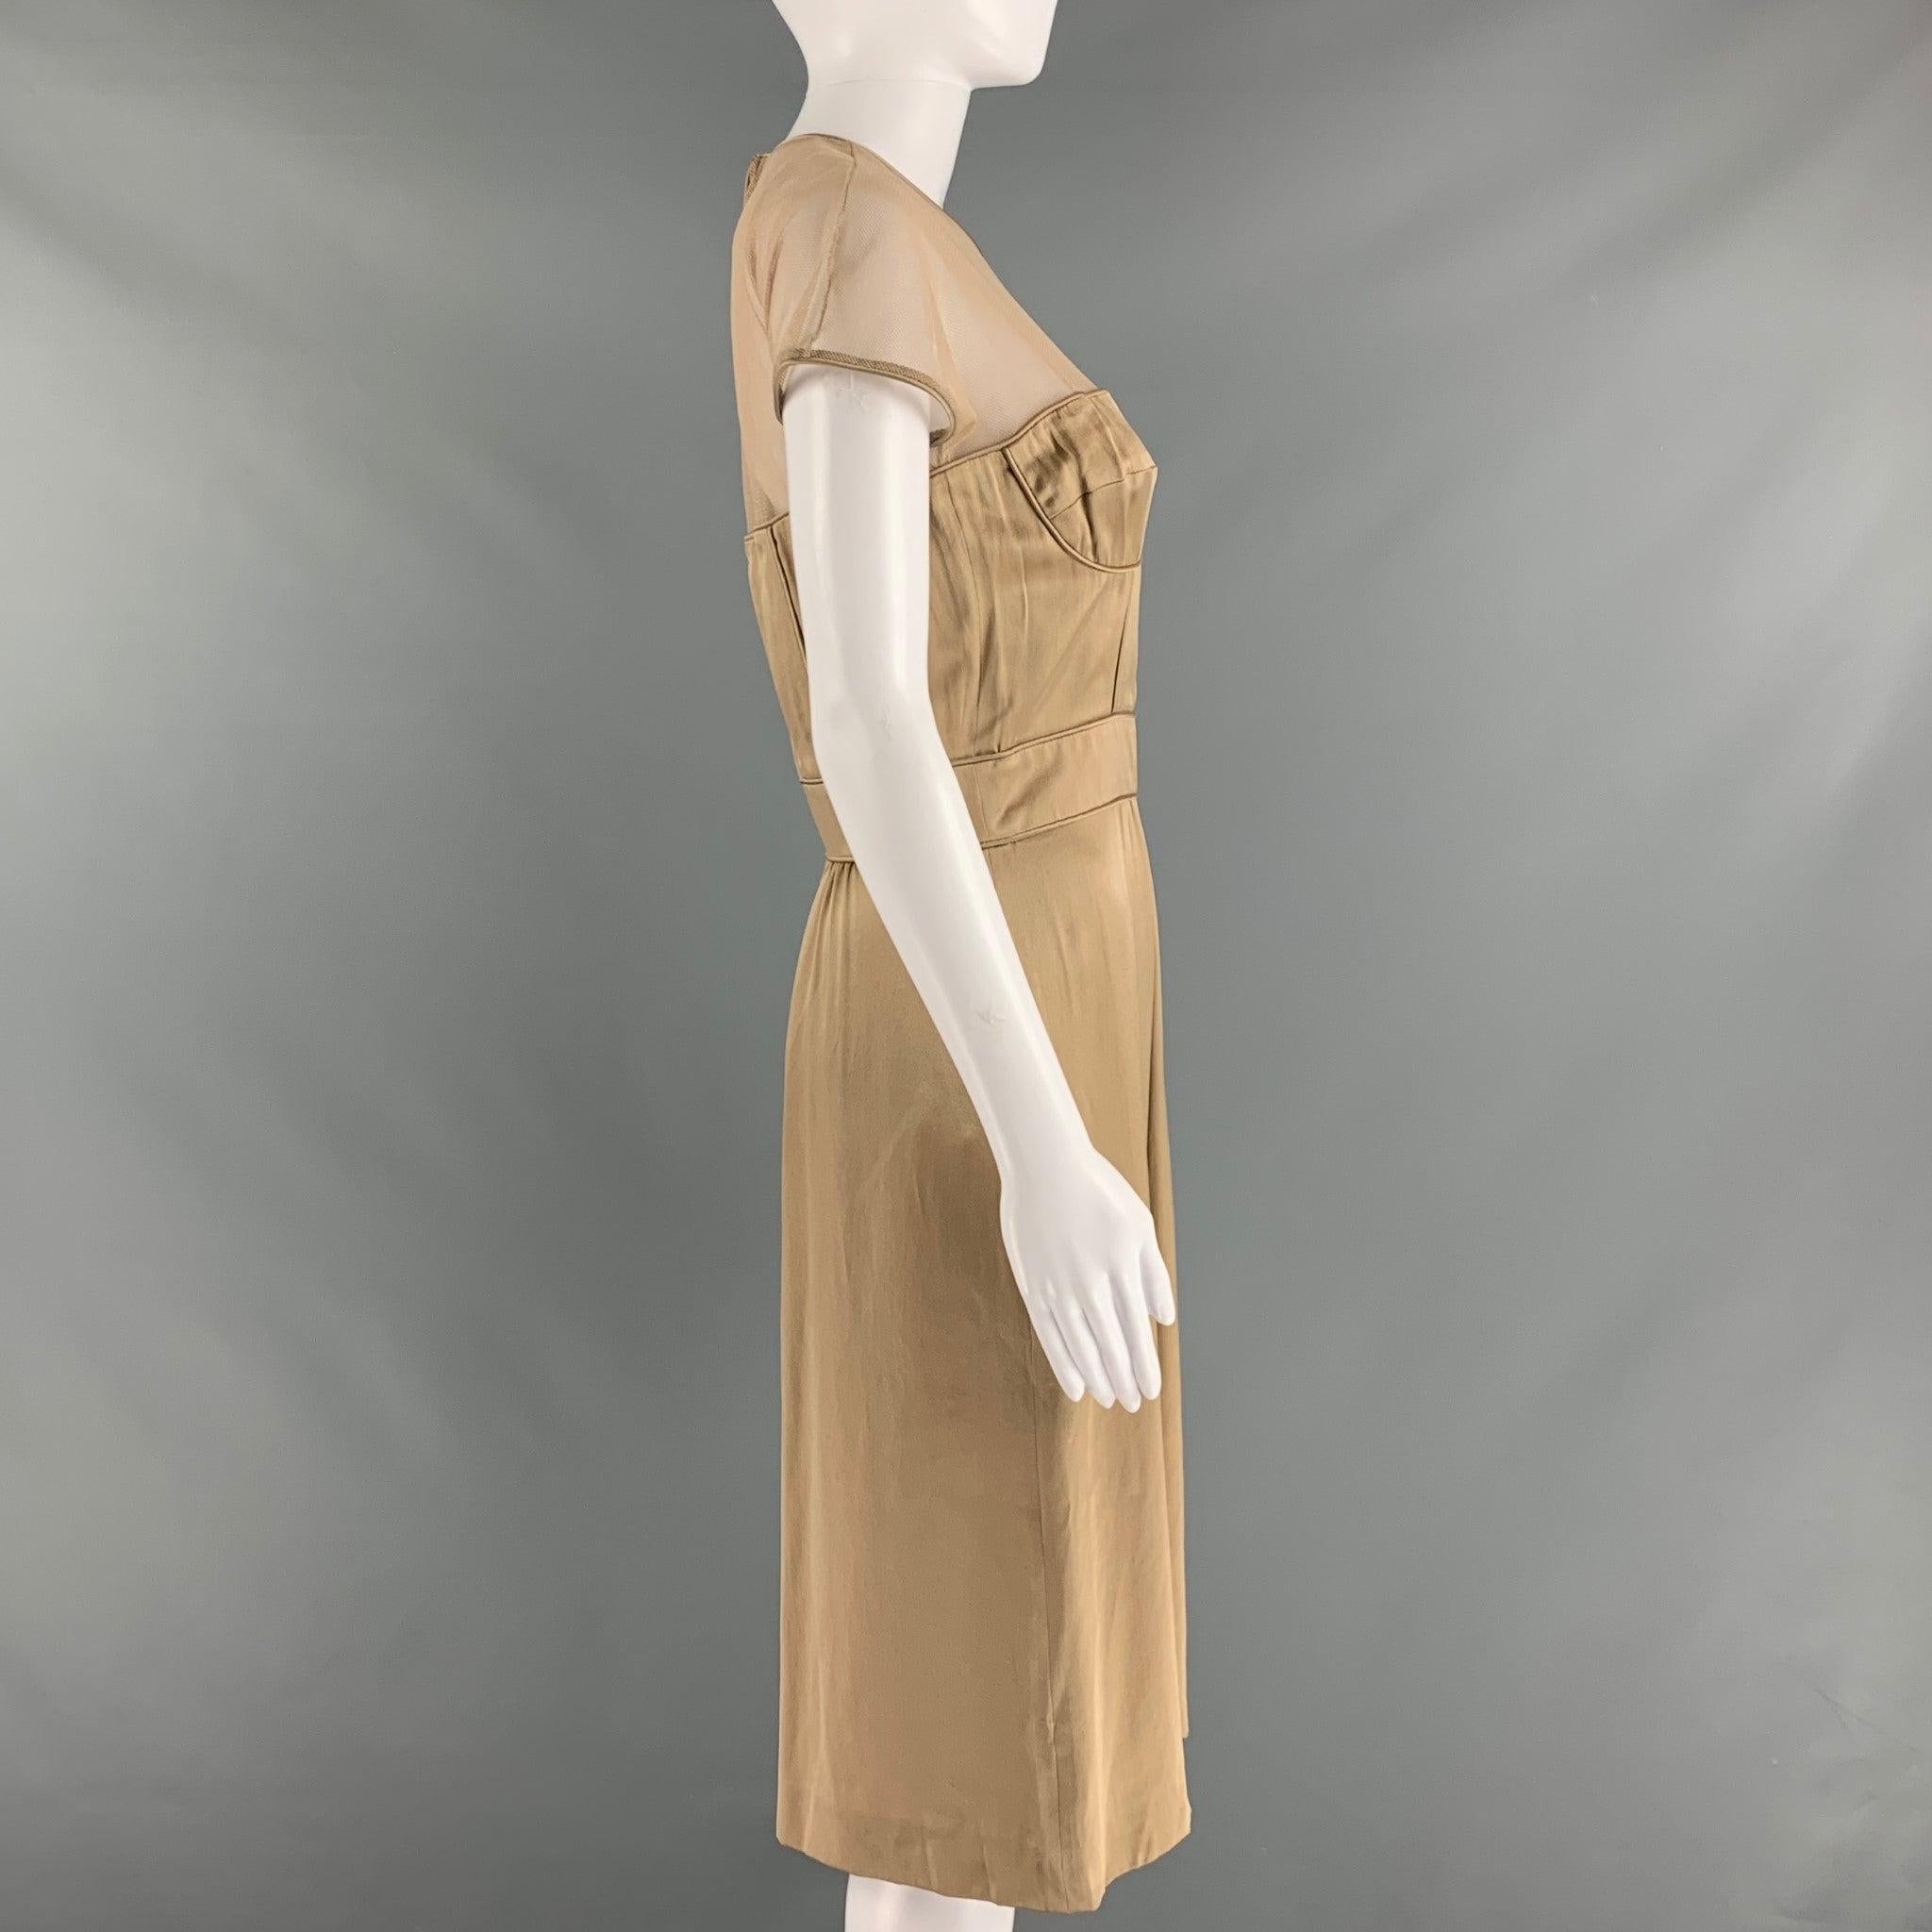 BURBERRY PRORSUM Size 10 Beige Silk Shift Knee-Length Dress In Excellent Condition For Sale In San Francisco, CA